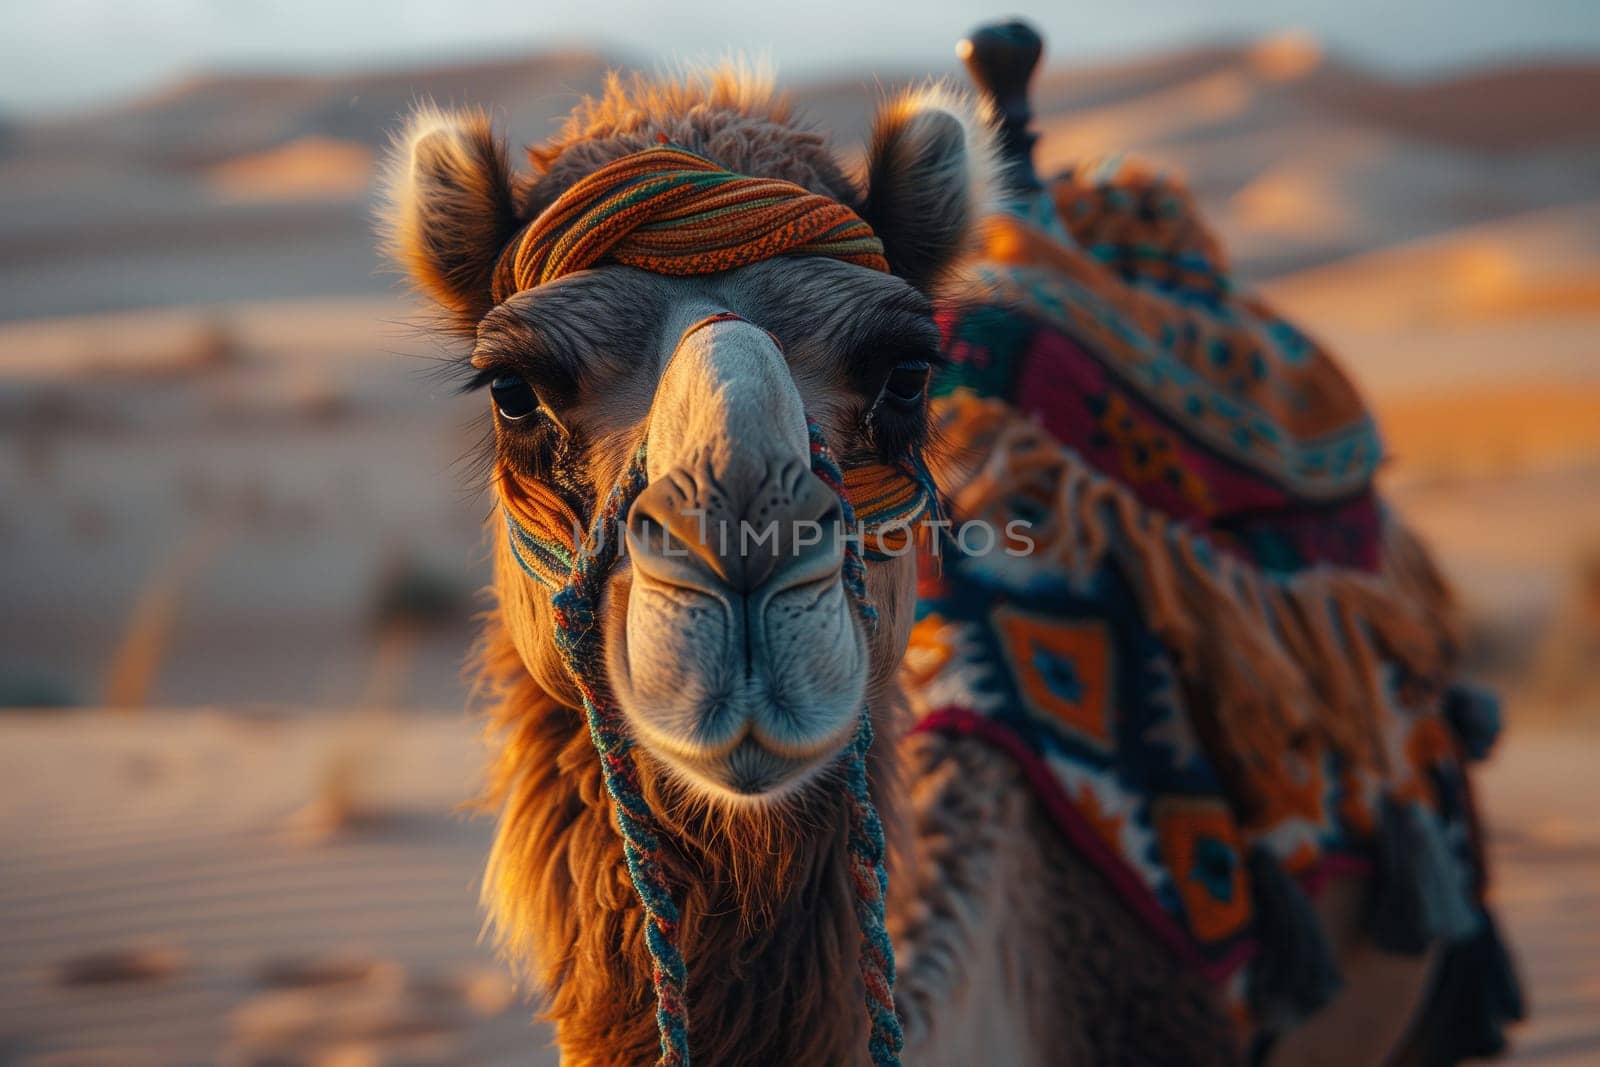 a close up of a camel s face in the desert by richwolf